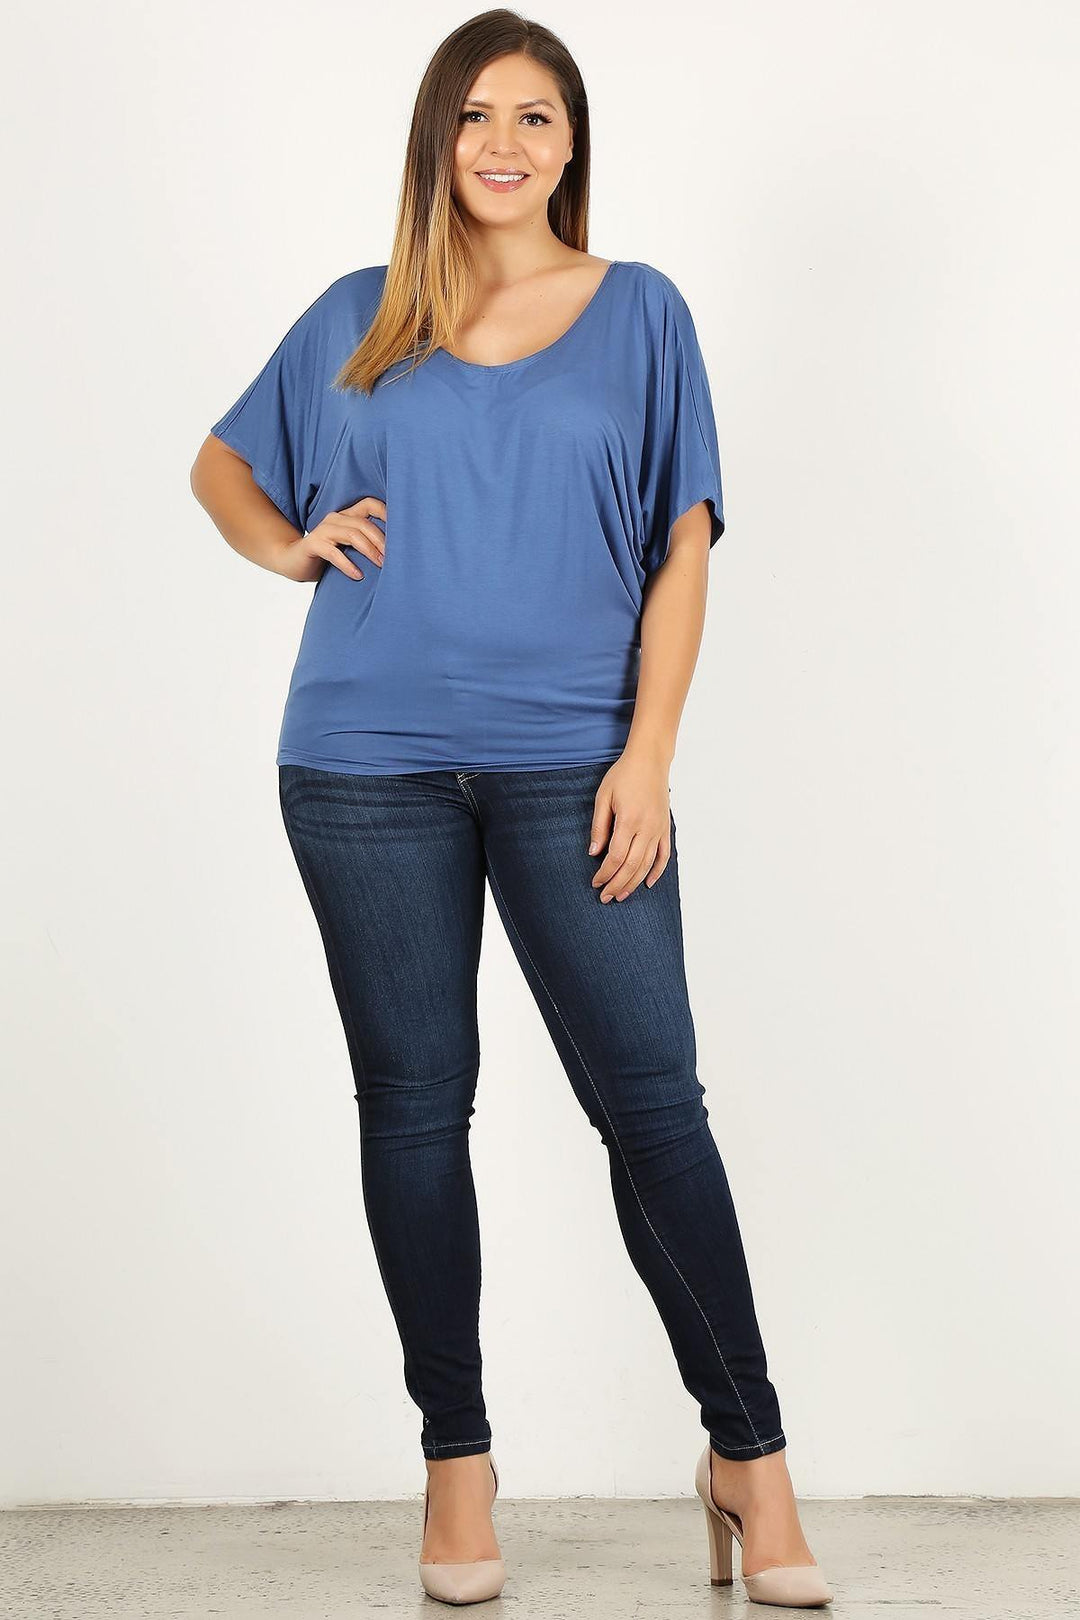 Solid Knit Top With A Flowy Silhouette in Indigo